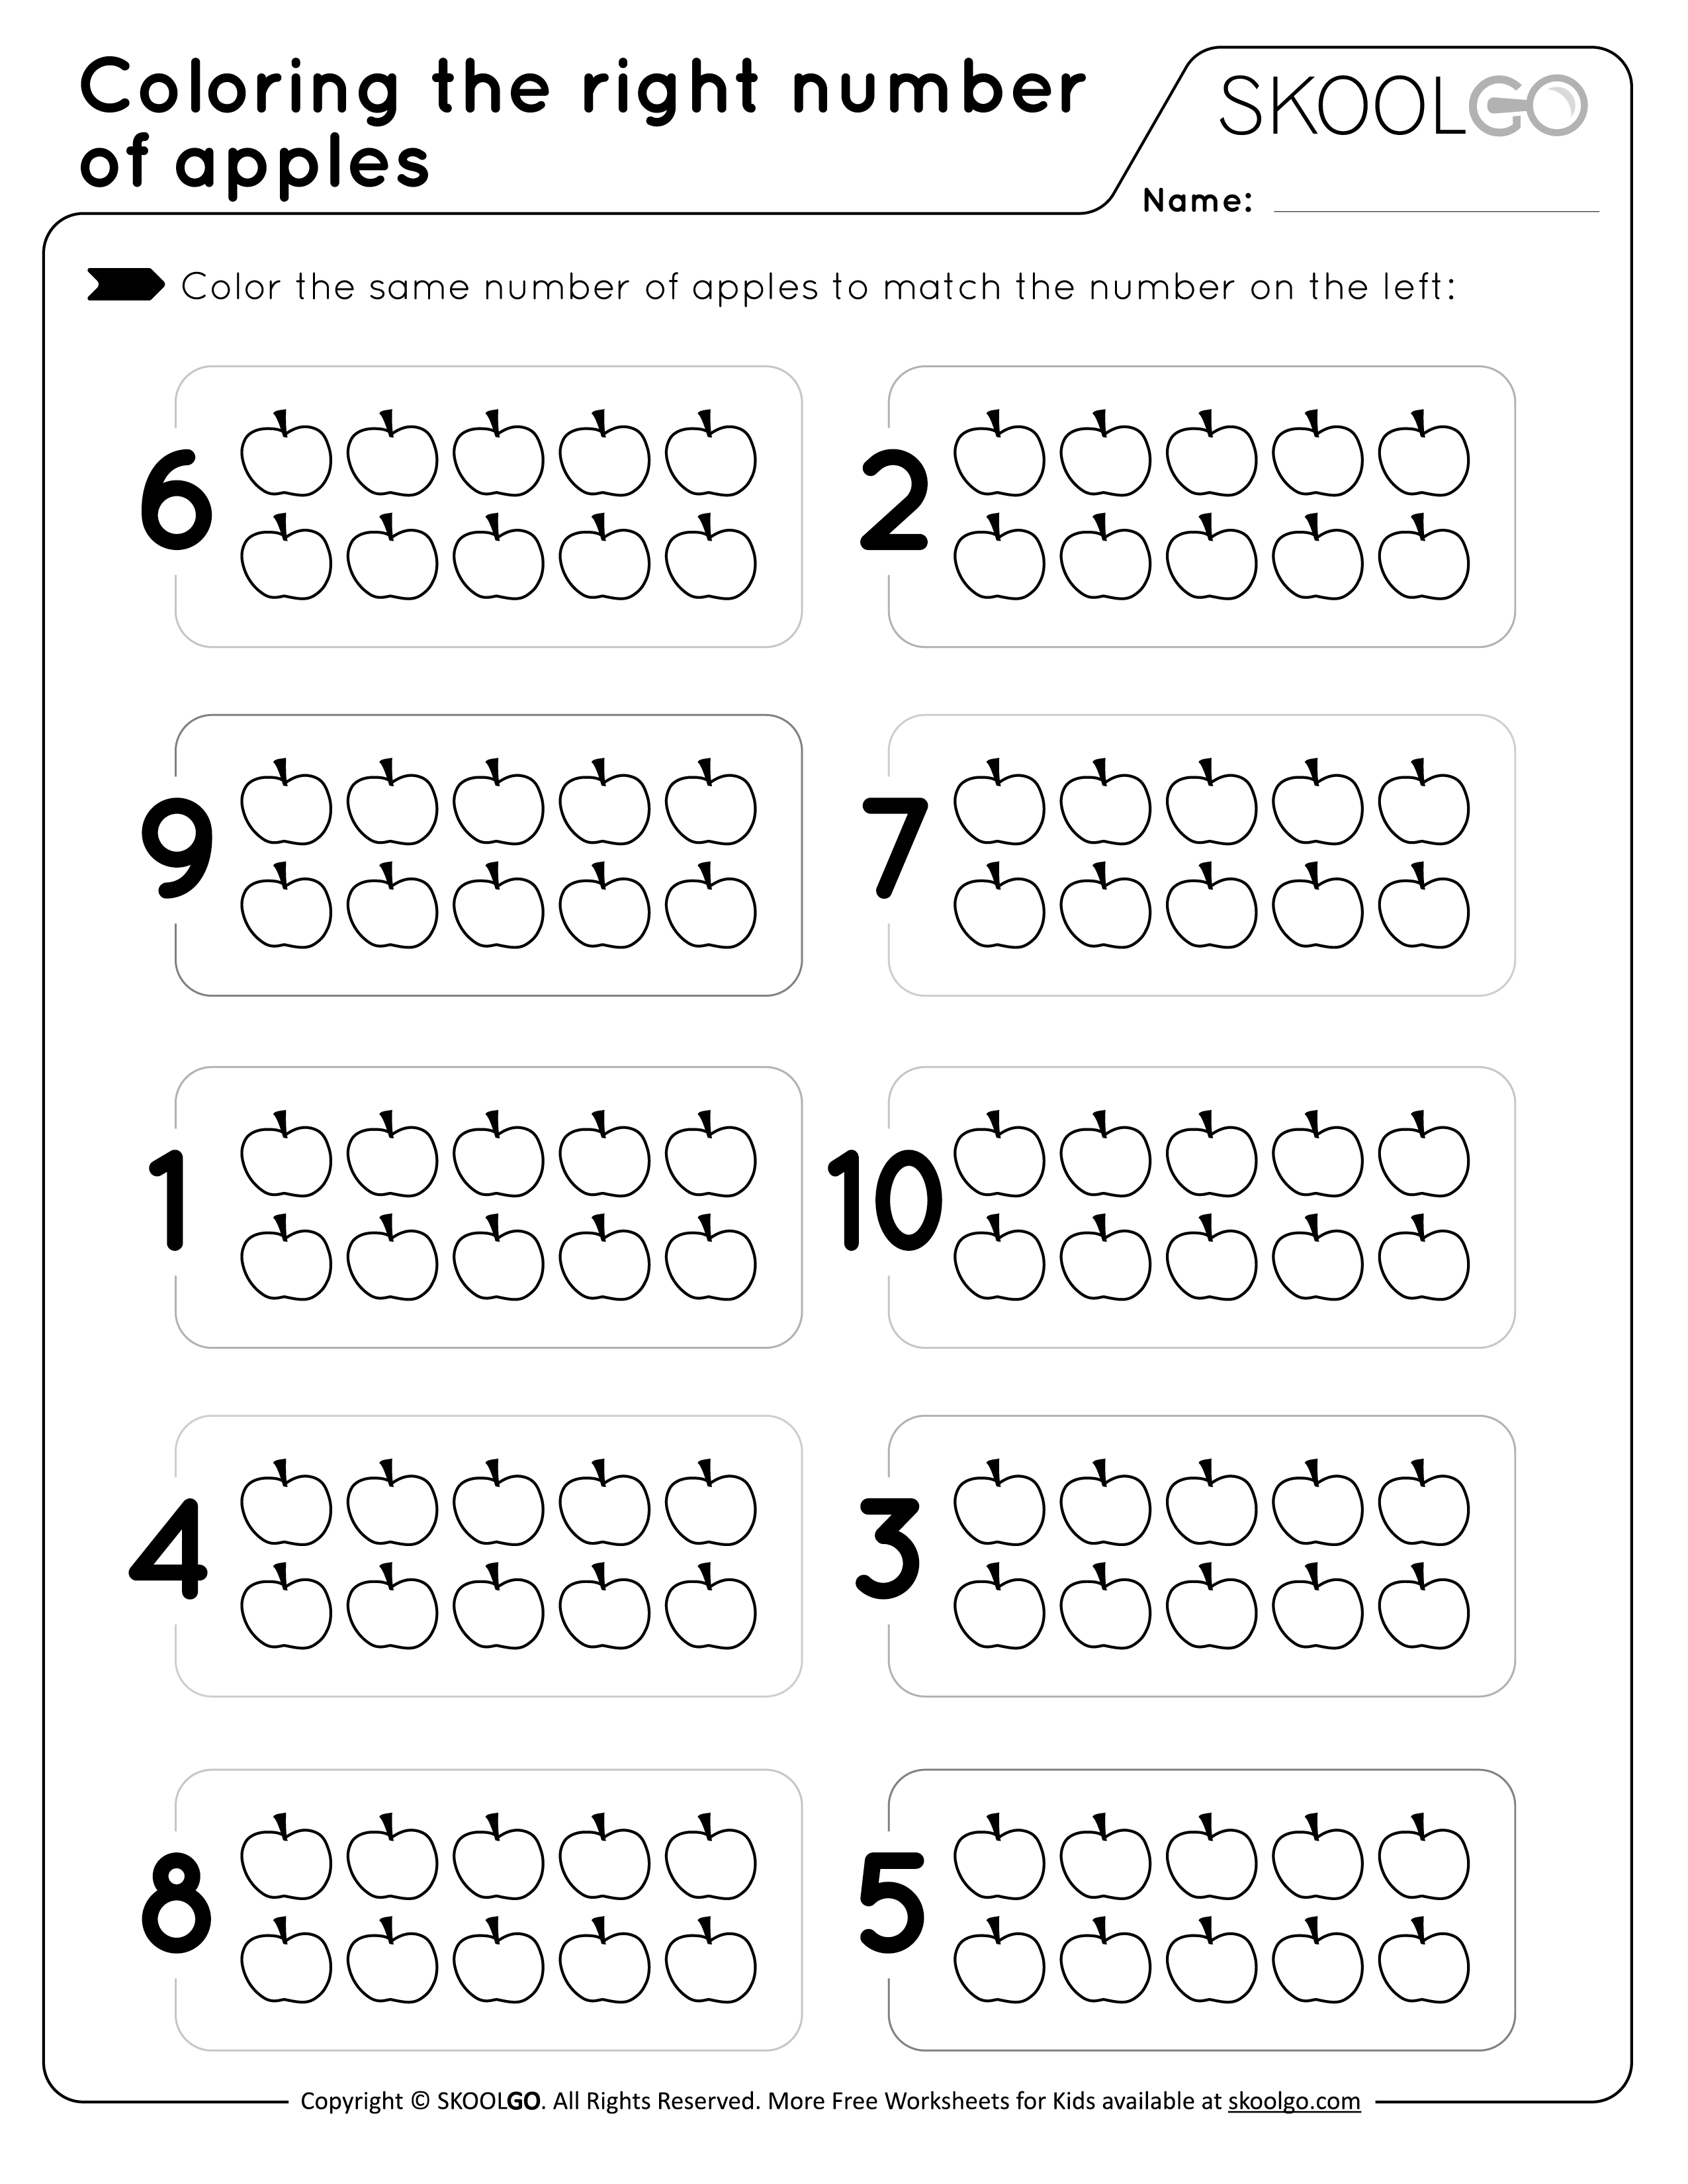 Free Coloring the Right Number of Apples Worksheet for Kids - Black and White version